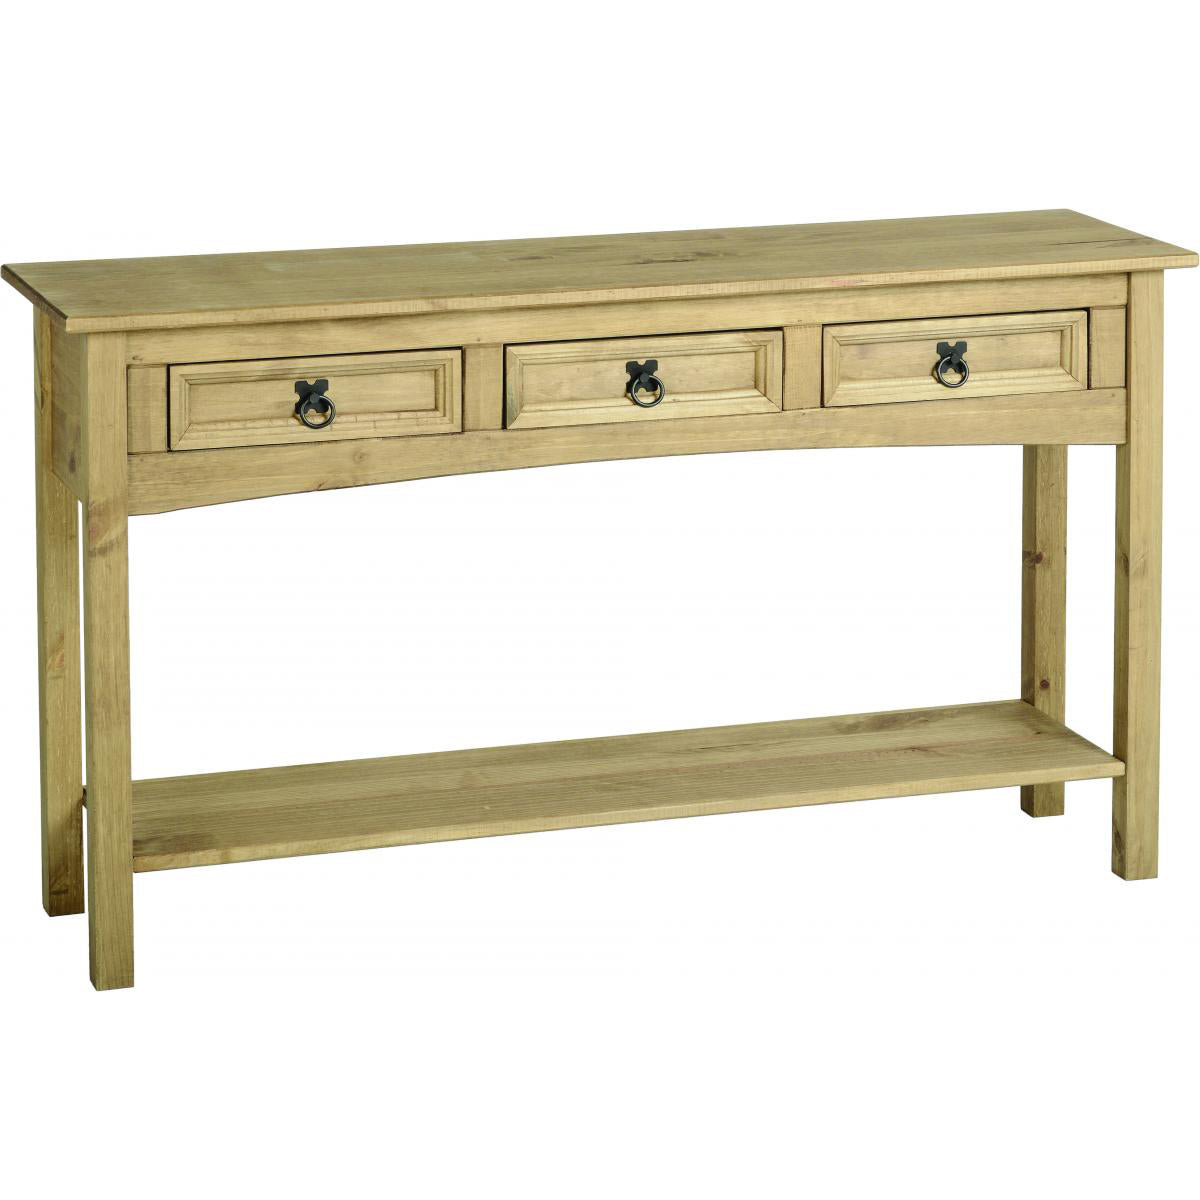 Corona Console Table 3 Drawers With Shelf